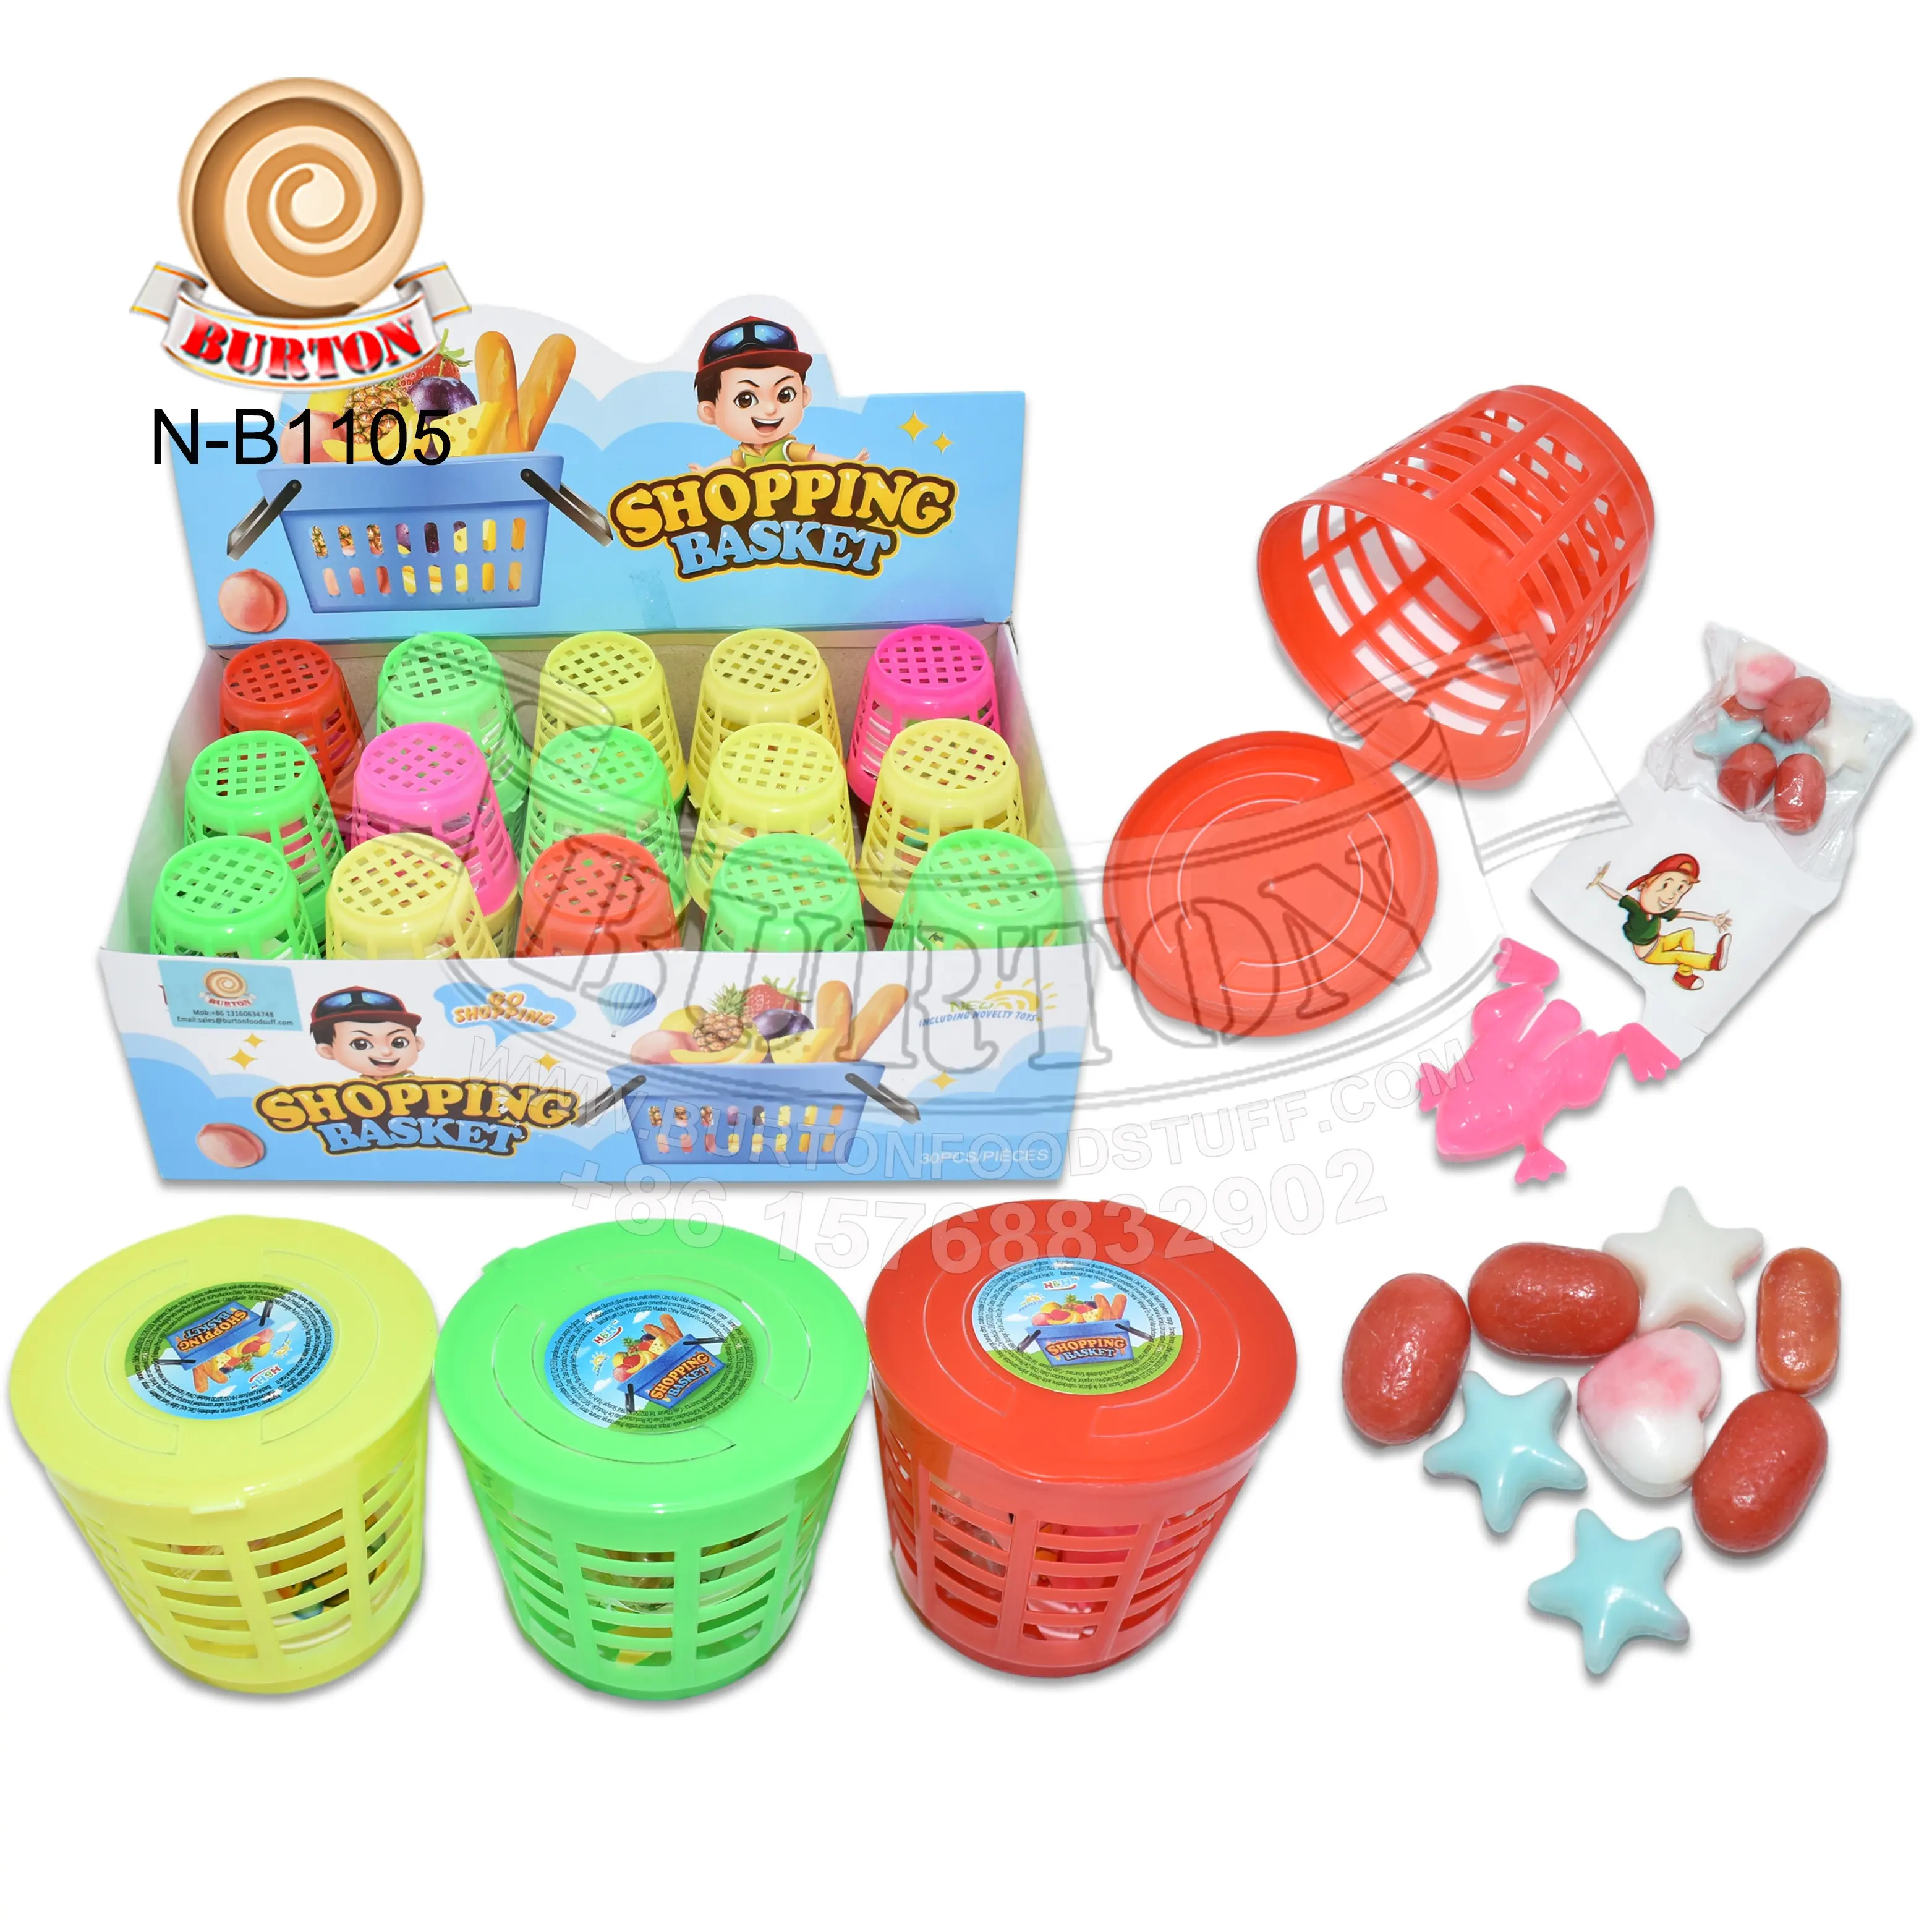 Shopping basket shape toy candy with fruit flavor hard candy and tattoo sticker